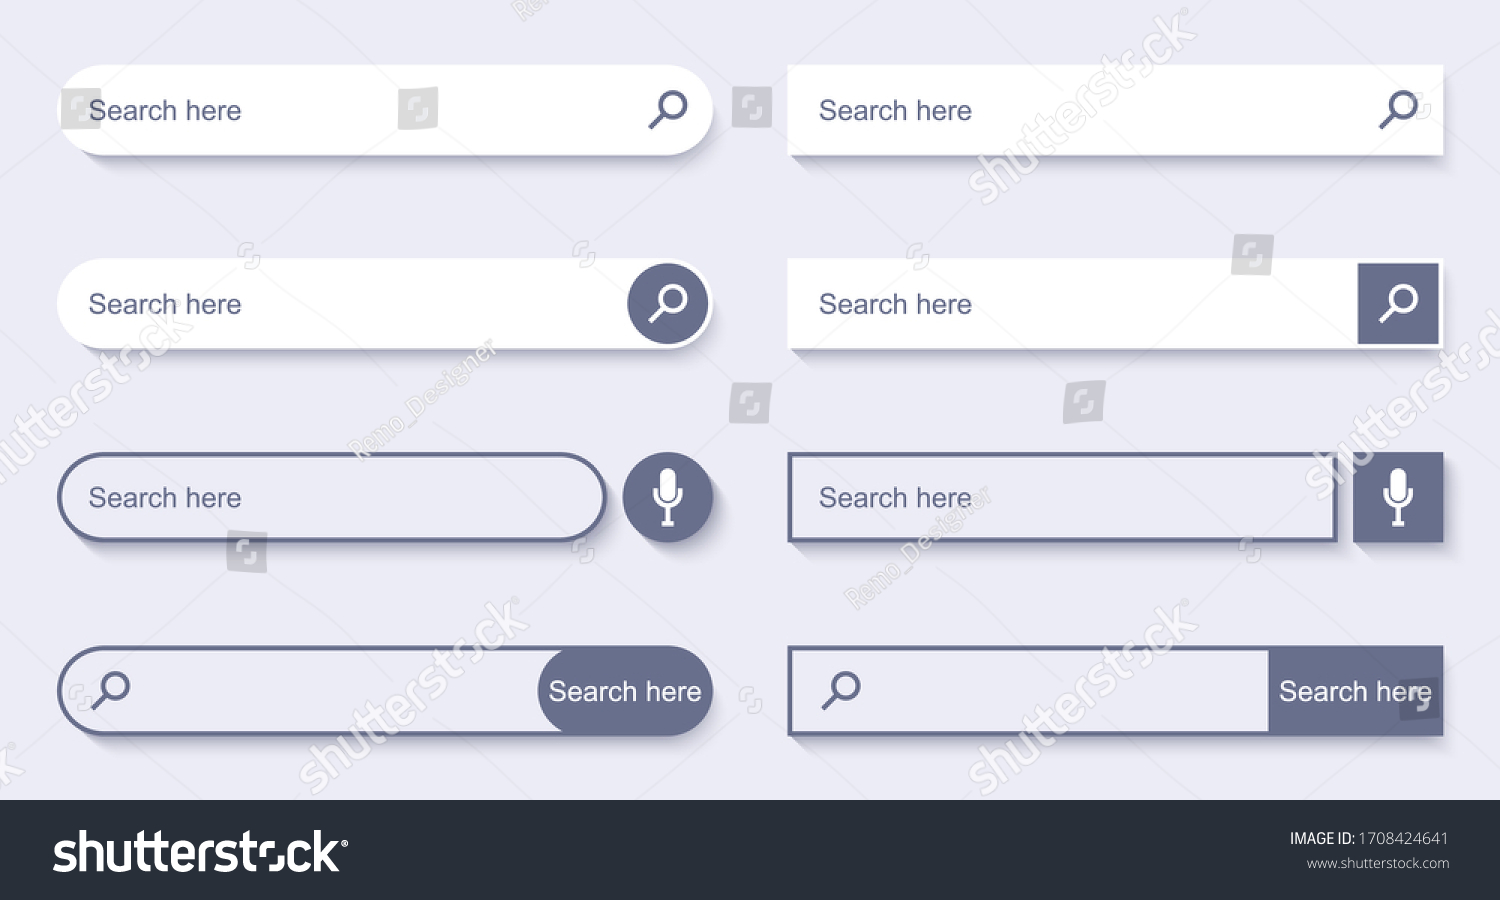 Search Bar for UI design. Set of elements for design interface of website. Search form with shadow. Navigation bar web icons. Vector illustration. #1708424641